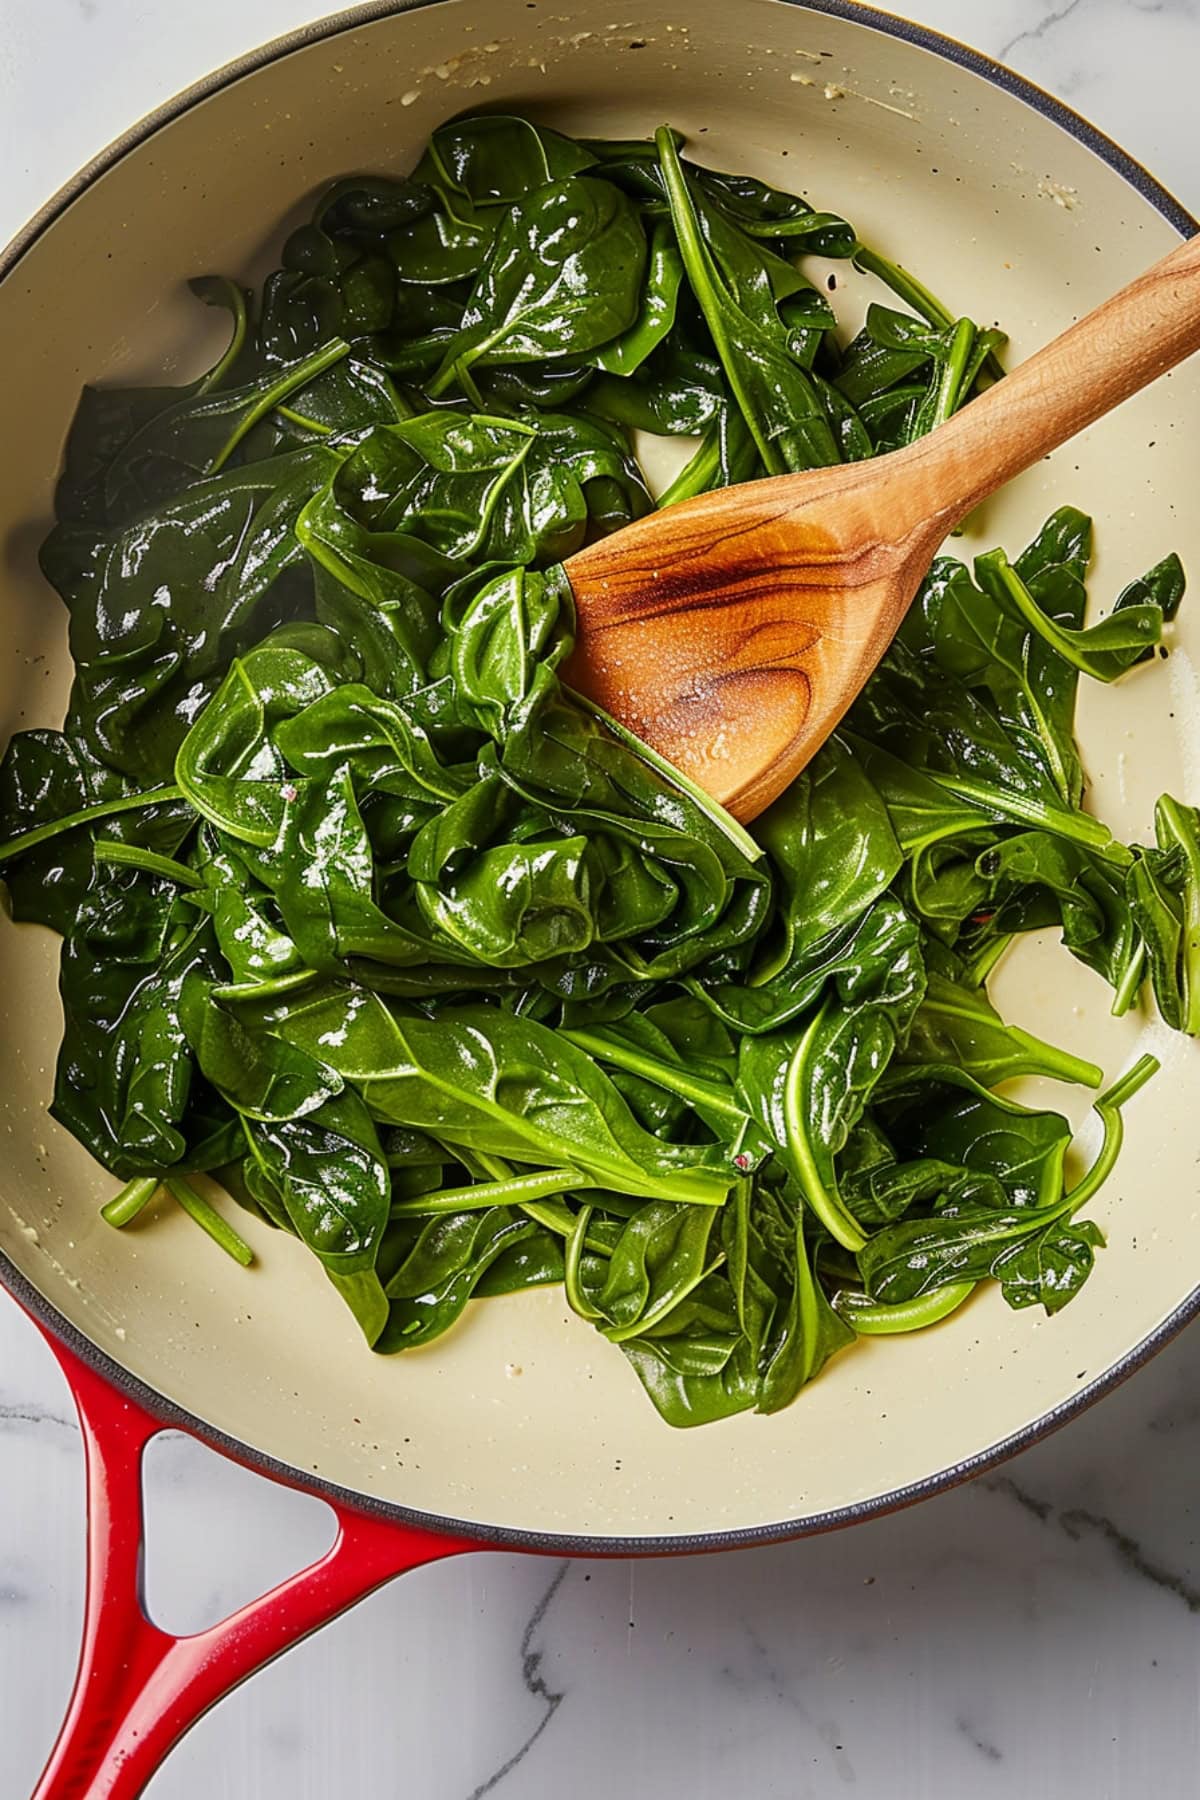 Top view of cooked baby spinach in a skillet with wooden spoon.